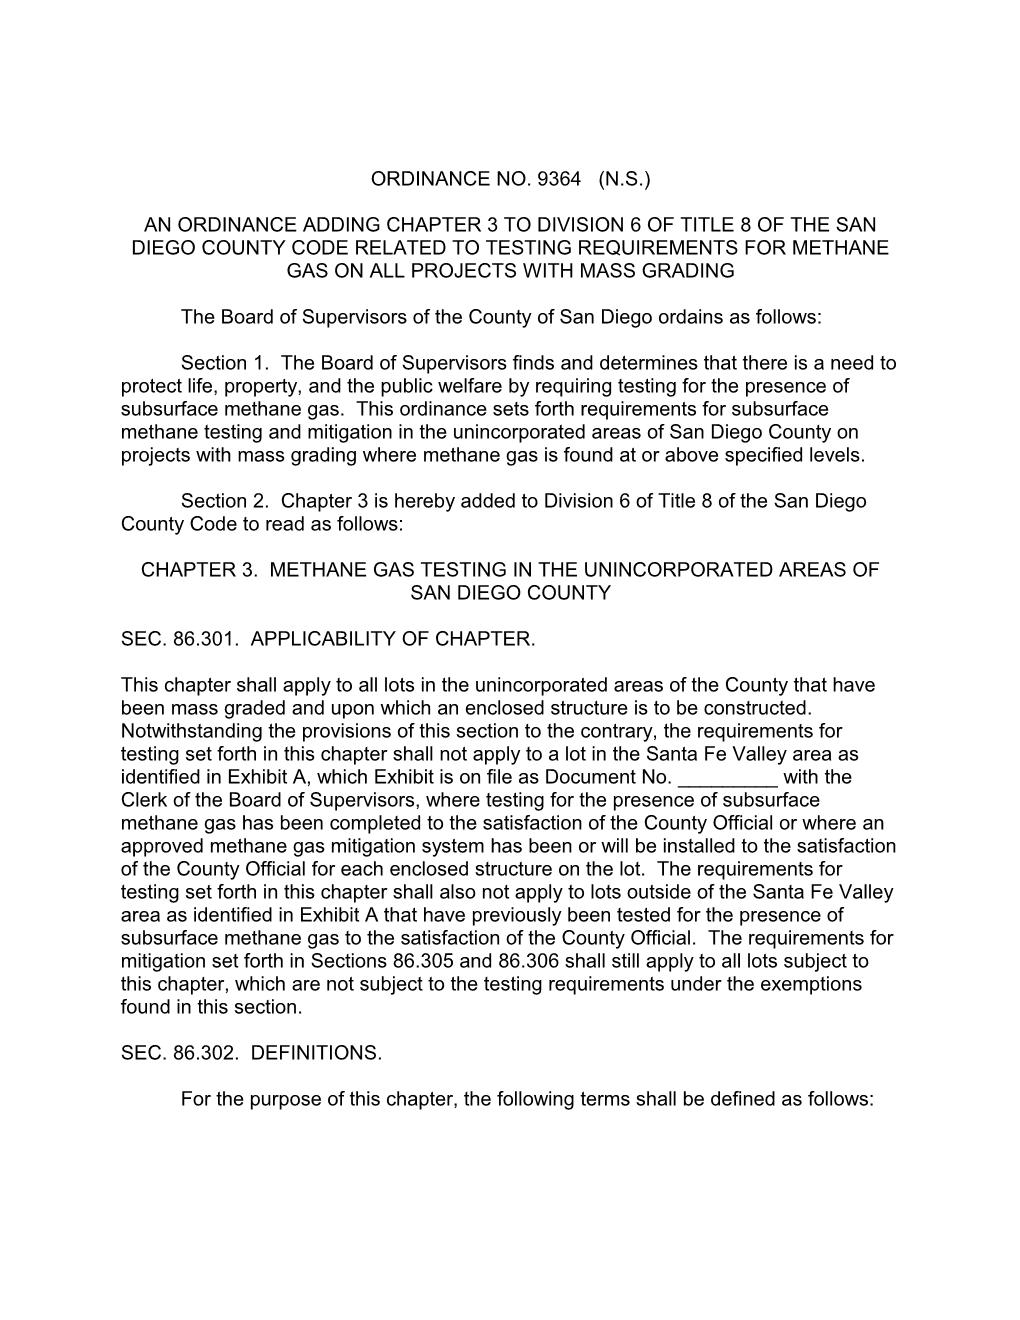 An Ordinance Requiring Testing for Methane Gas in the Santa Fe Valley Area